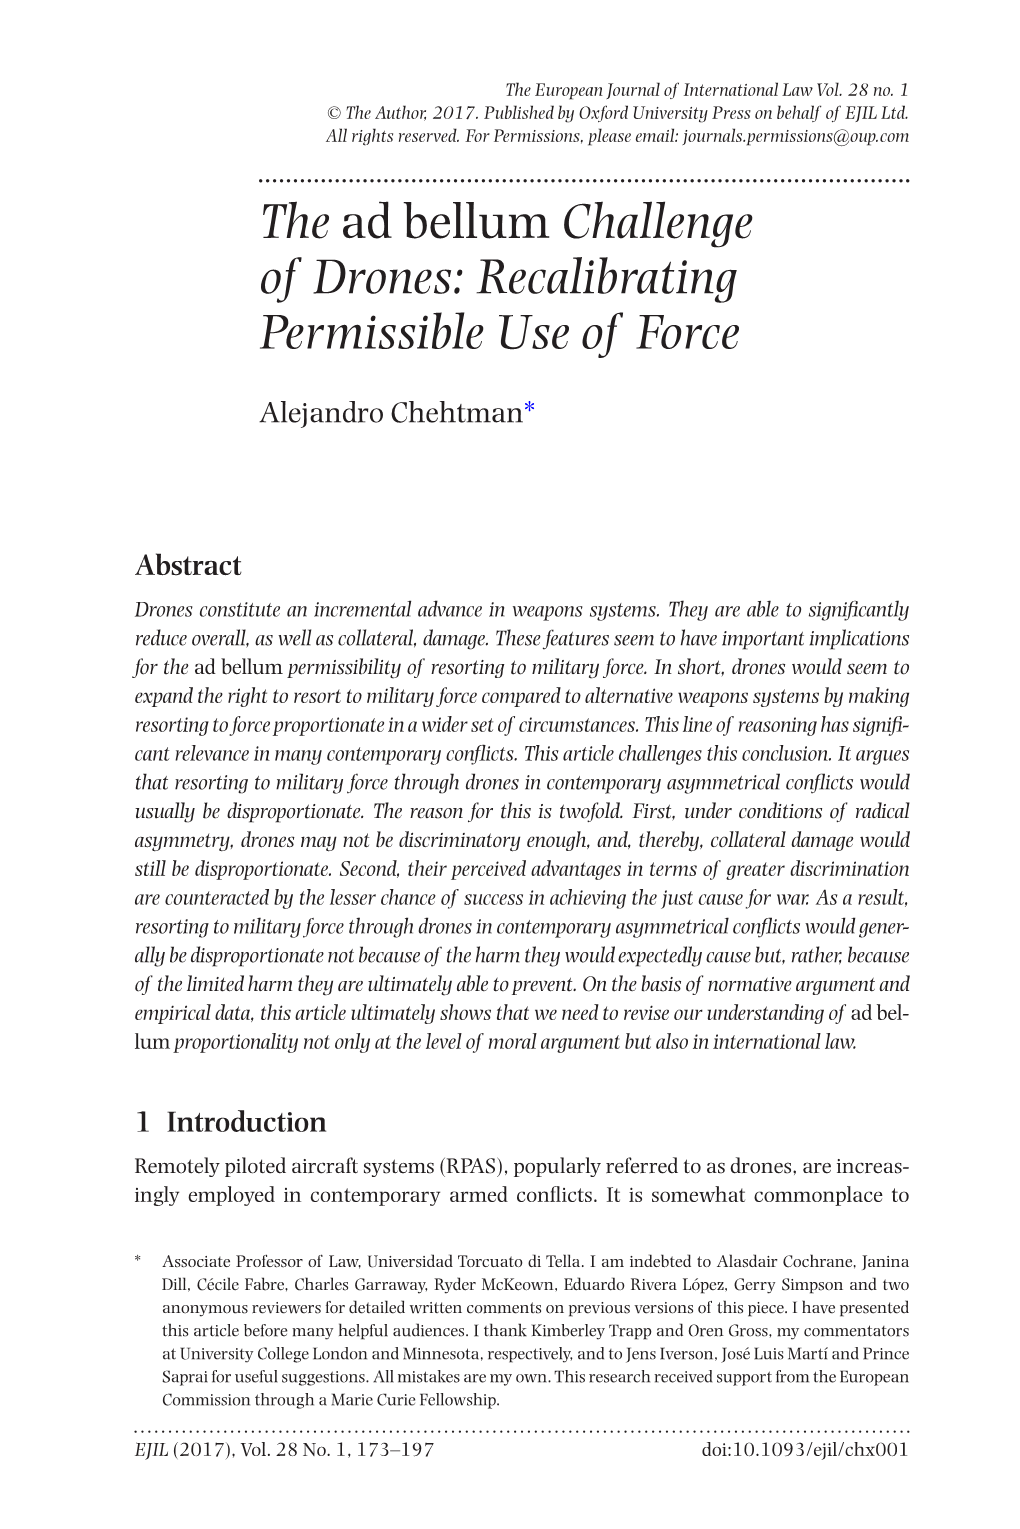 The Ad Bellum Challenge of Drones: Recalibrating Permissible Use of Force